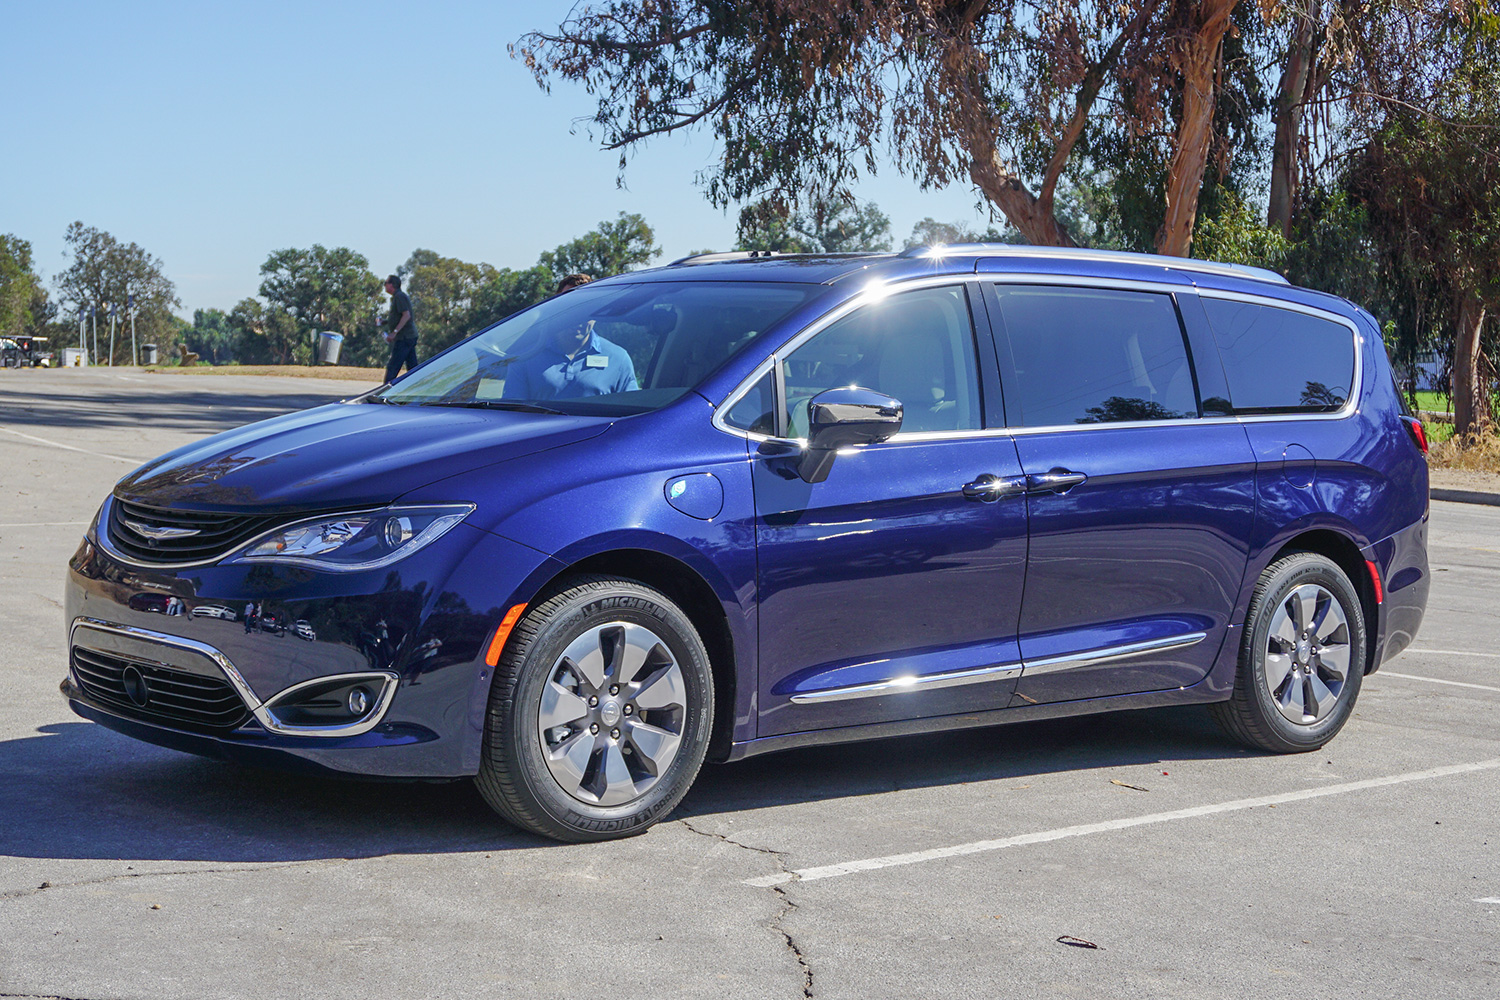 2017 Chrysler Pacifica Hybrid first drive | Digital Trends